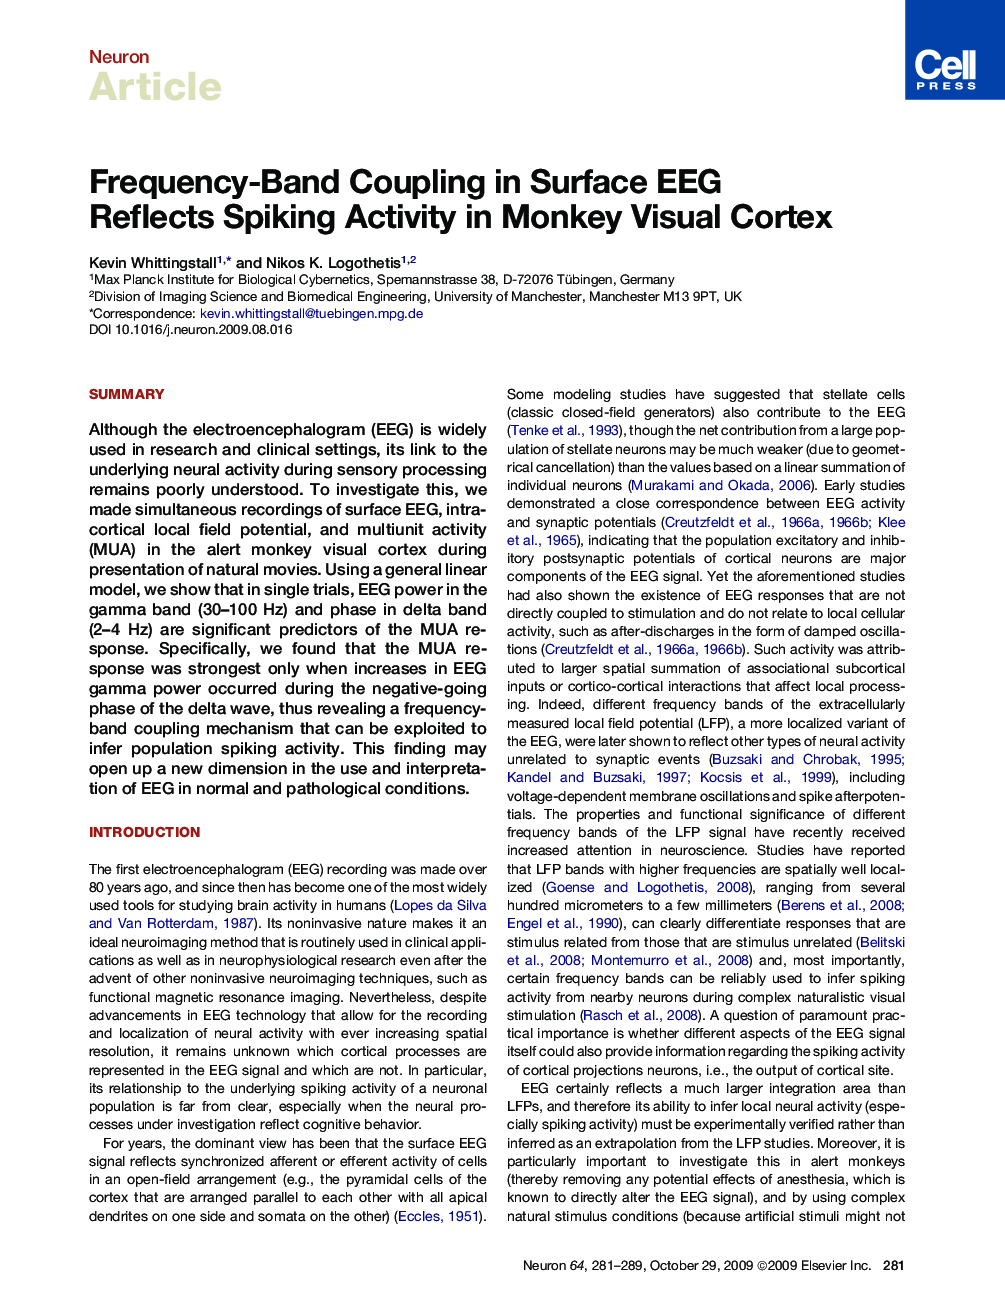 Frequency-Band Coupling in Surface EEG Reflects Spiking Activity in Monkey Visual Cortex